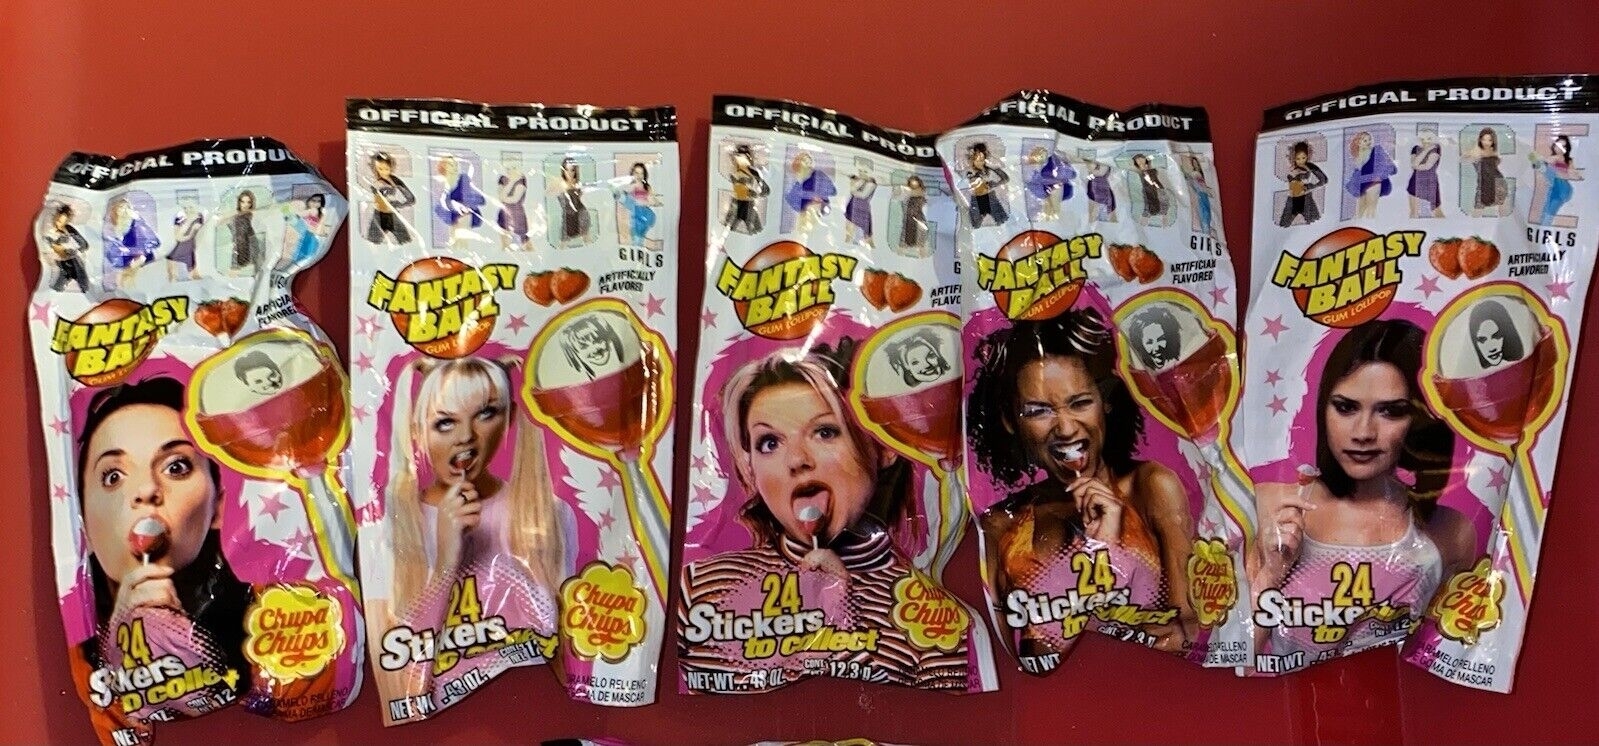 the lollipops with each spice girl on each package